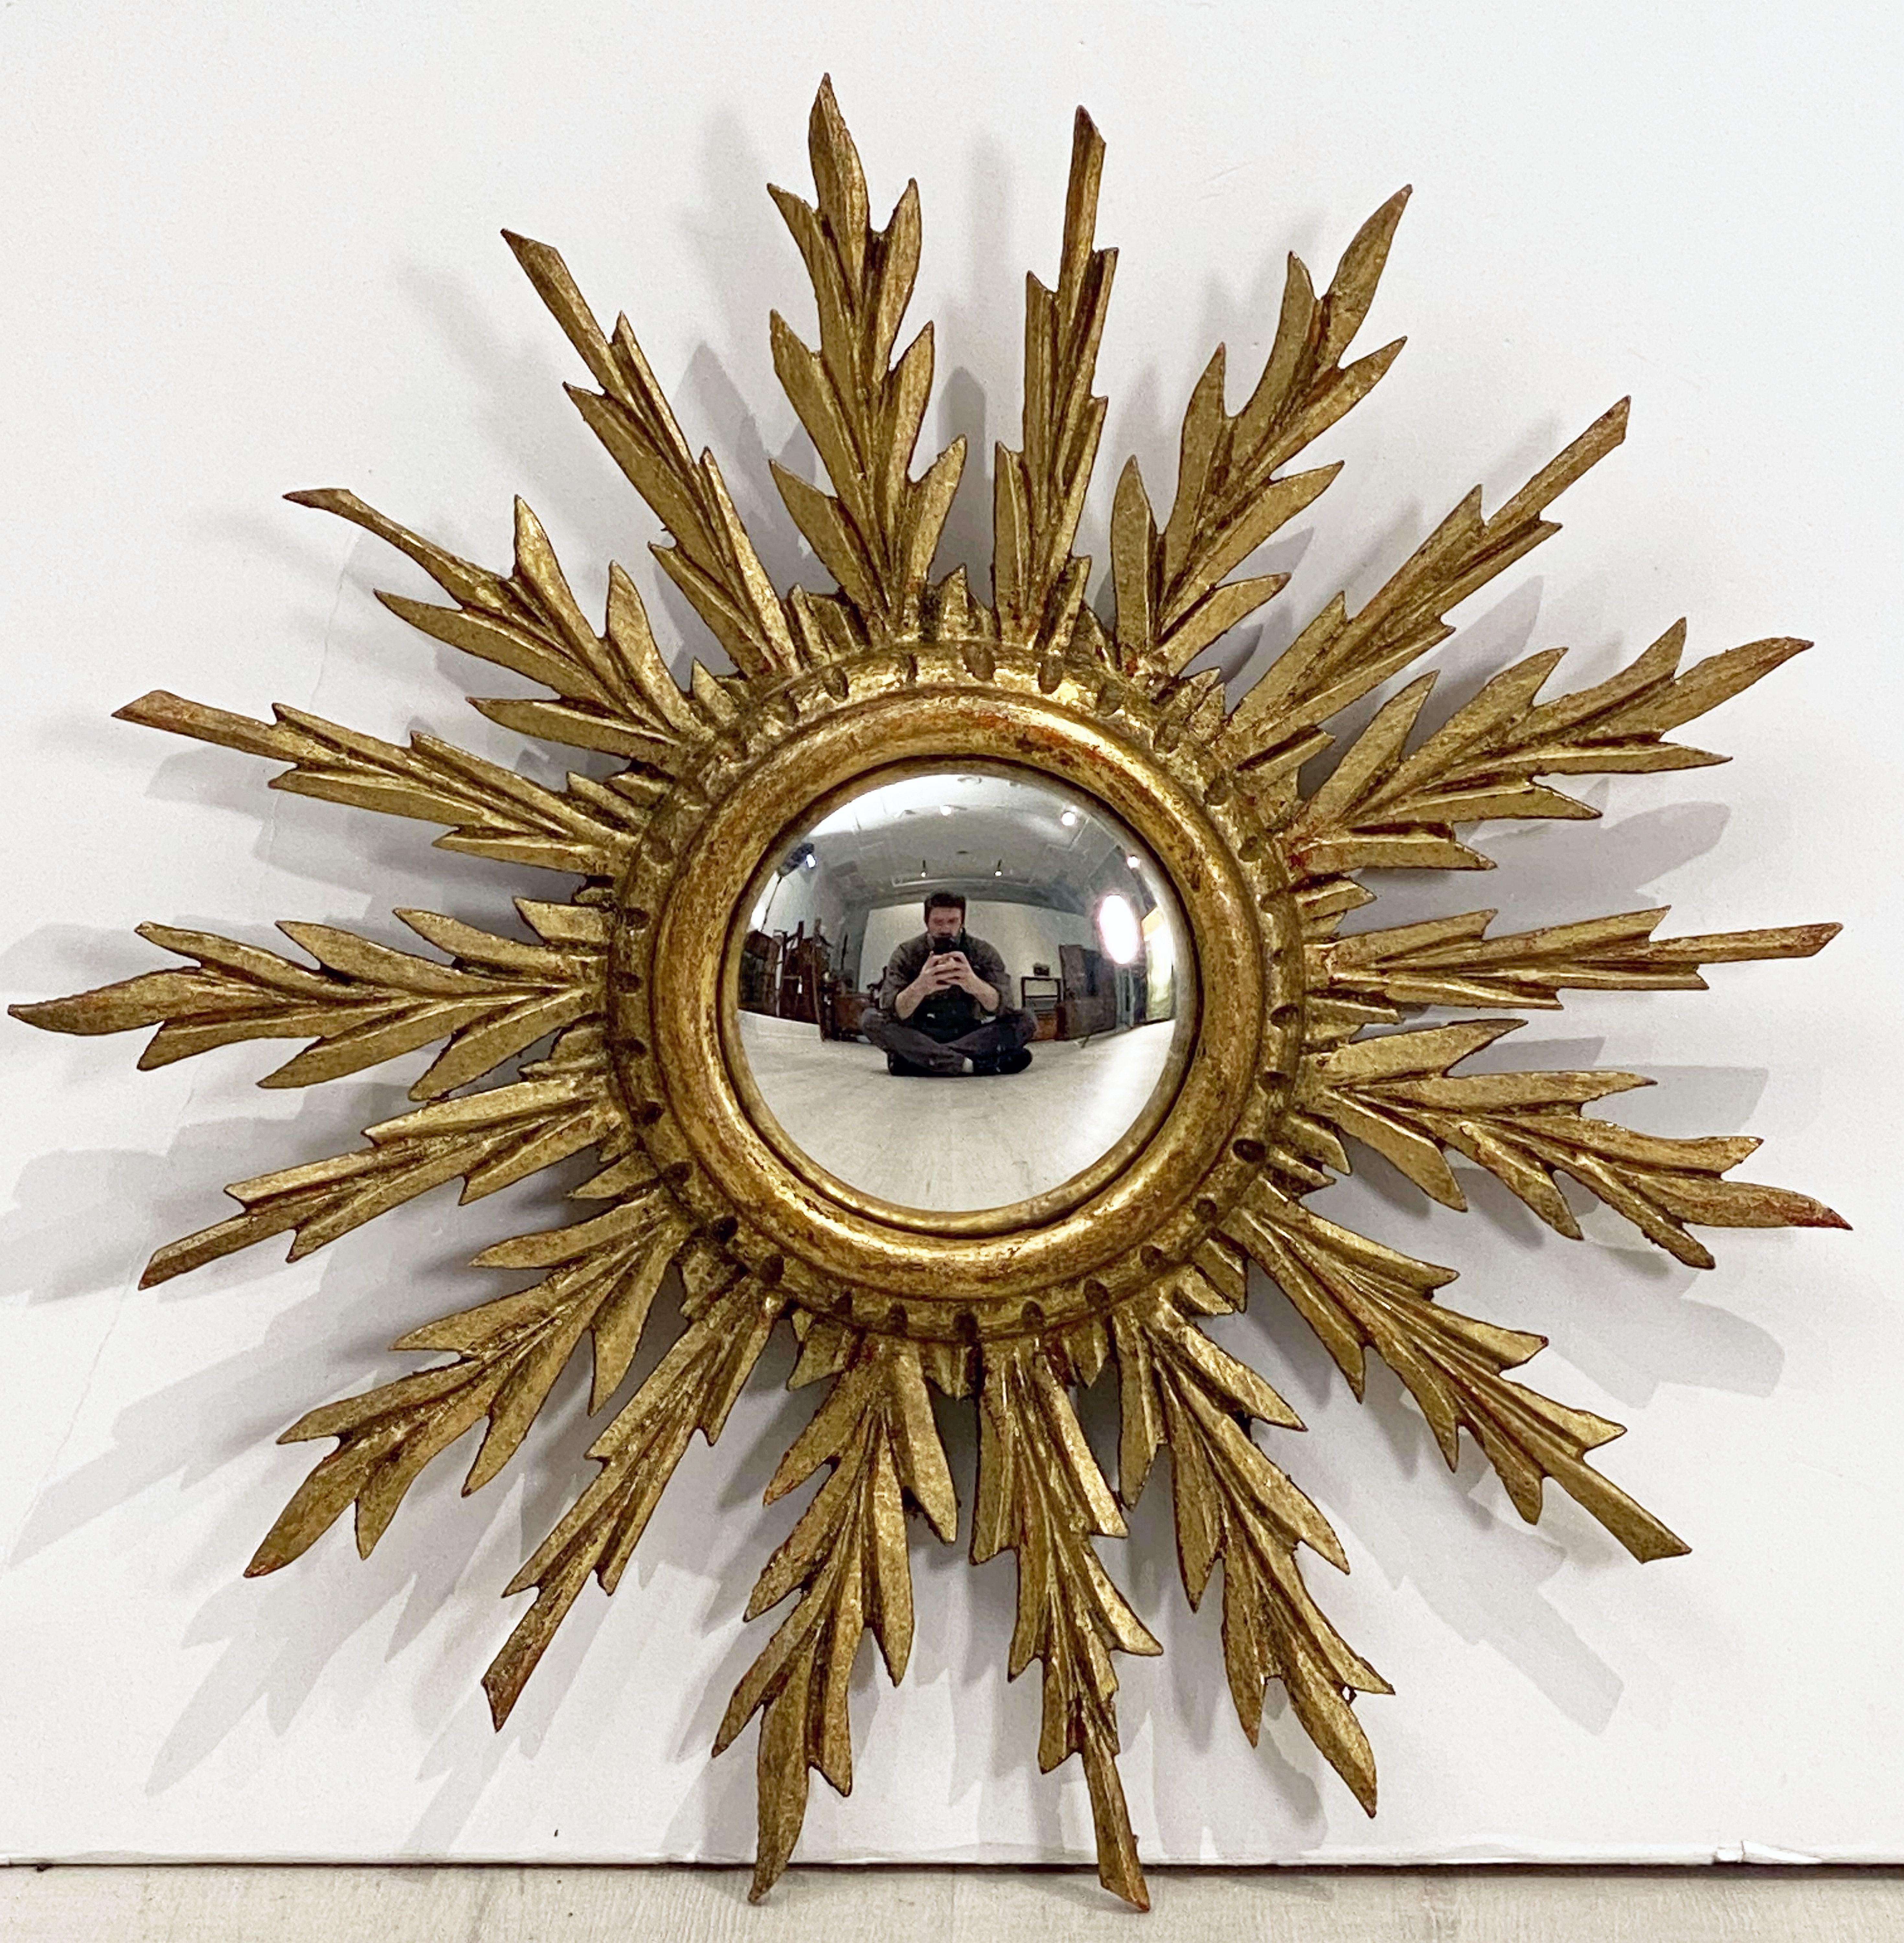 A lovely French gilt sunburst (or starburst) mirror with round convex mirrored glass center in moulded giltwood frame, the bright shining rays in the form of gilded leaves.

Measures: Diameter of 13 inches